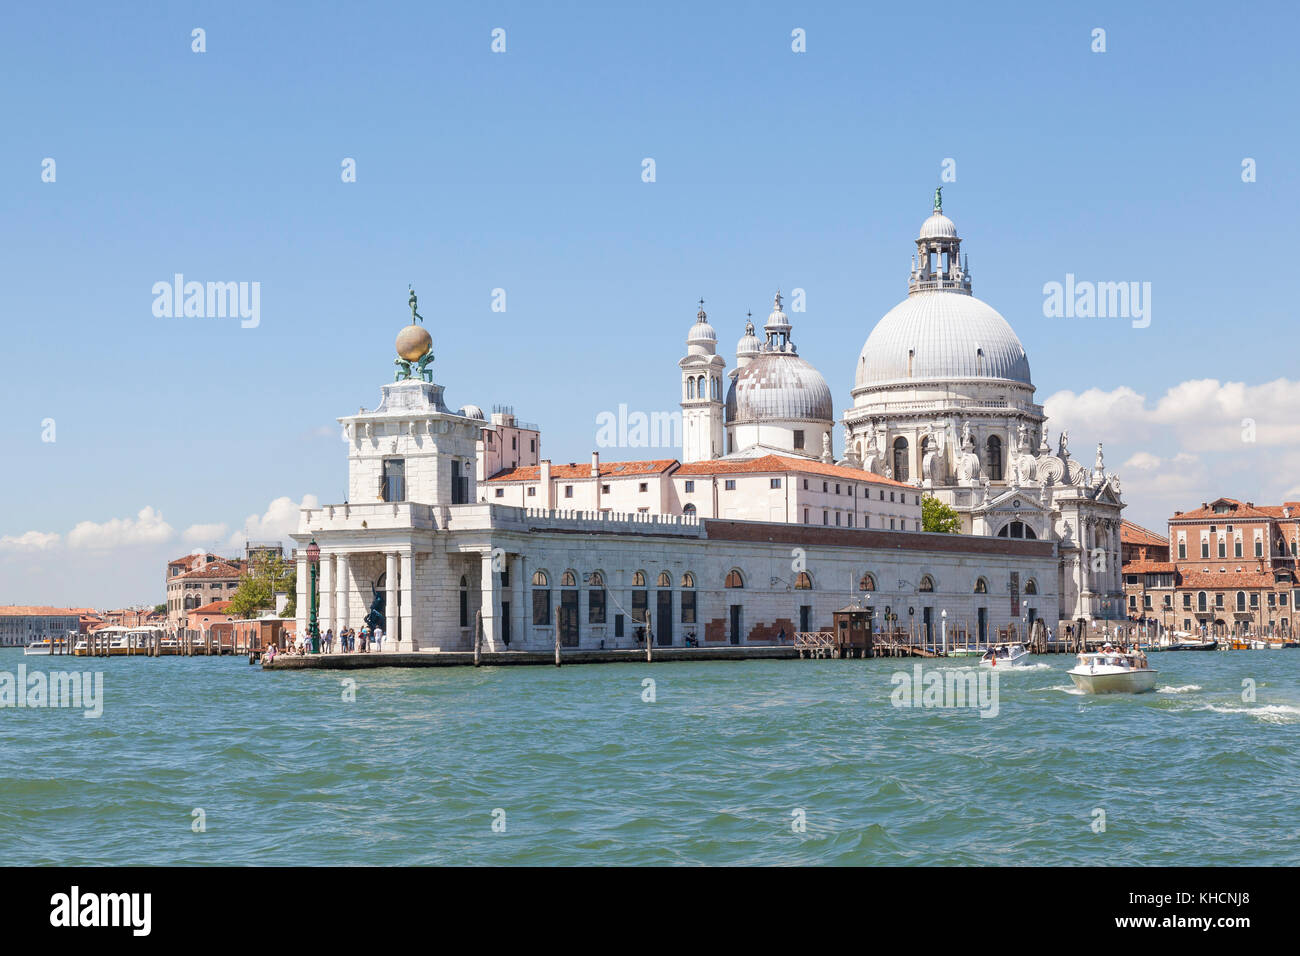 View from the lagoon of Punta della Dogana and Basilica di Santa Maria della Salute, Venice, Italy on a sunny day with tourists and water taxis. This  Stock Photo